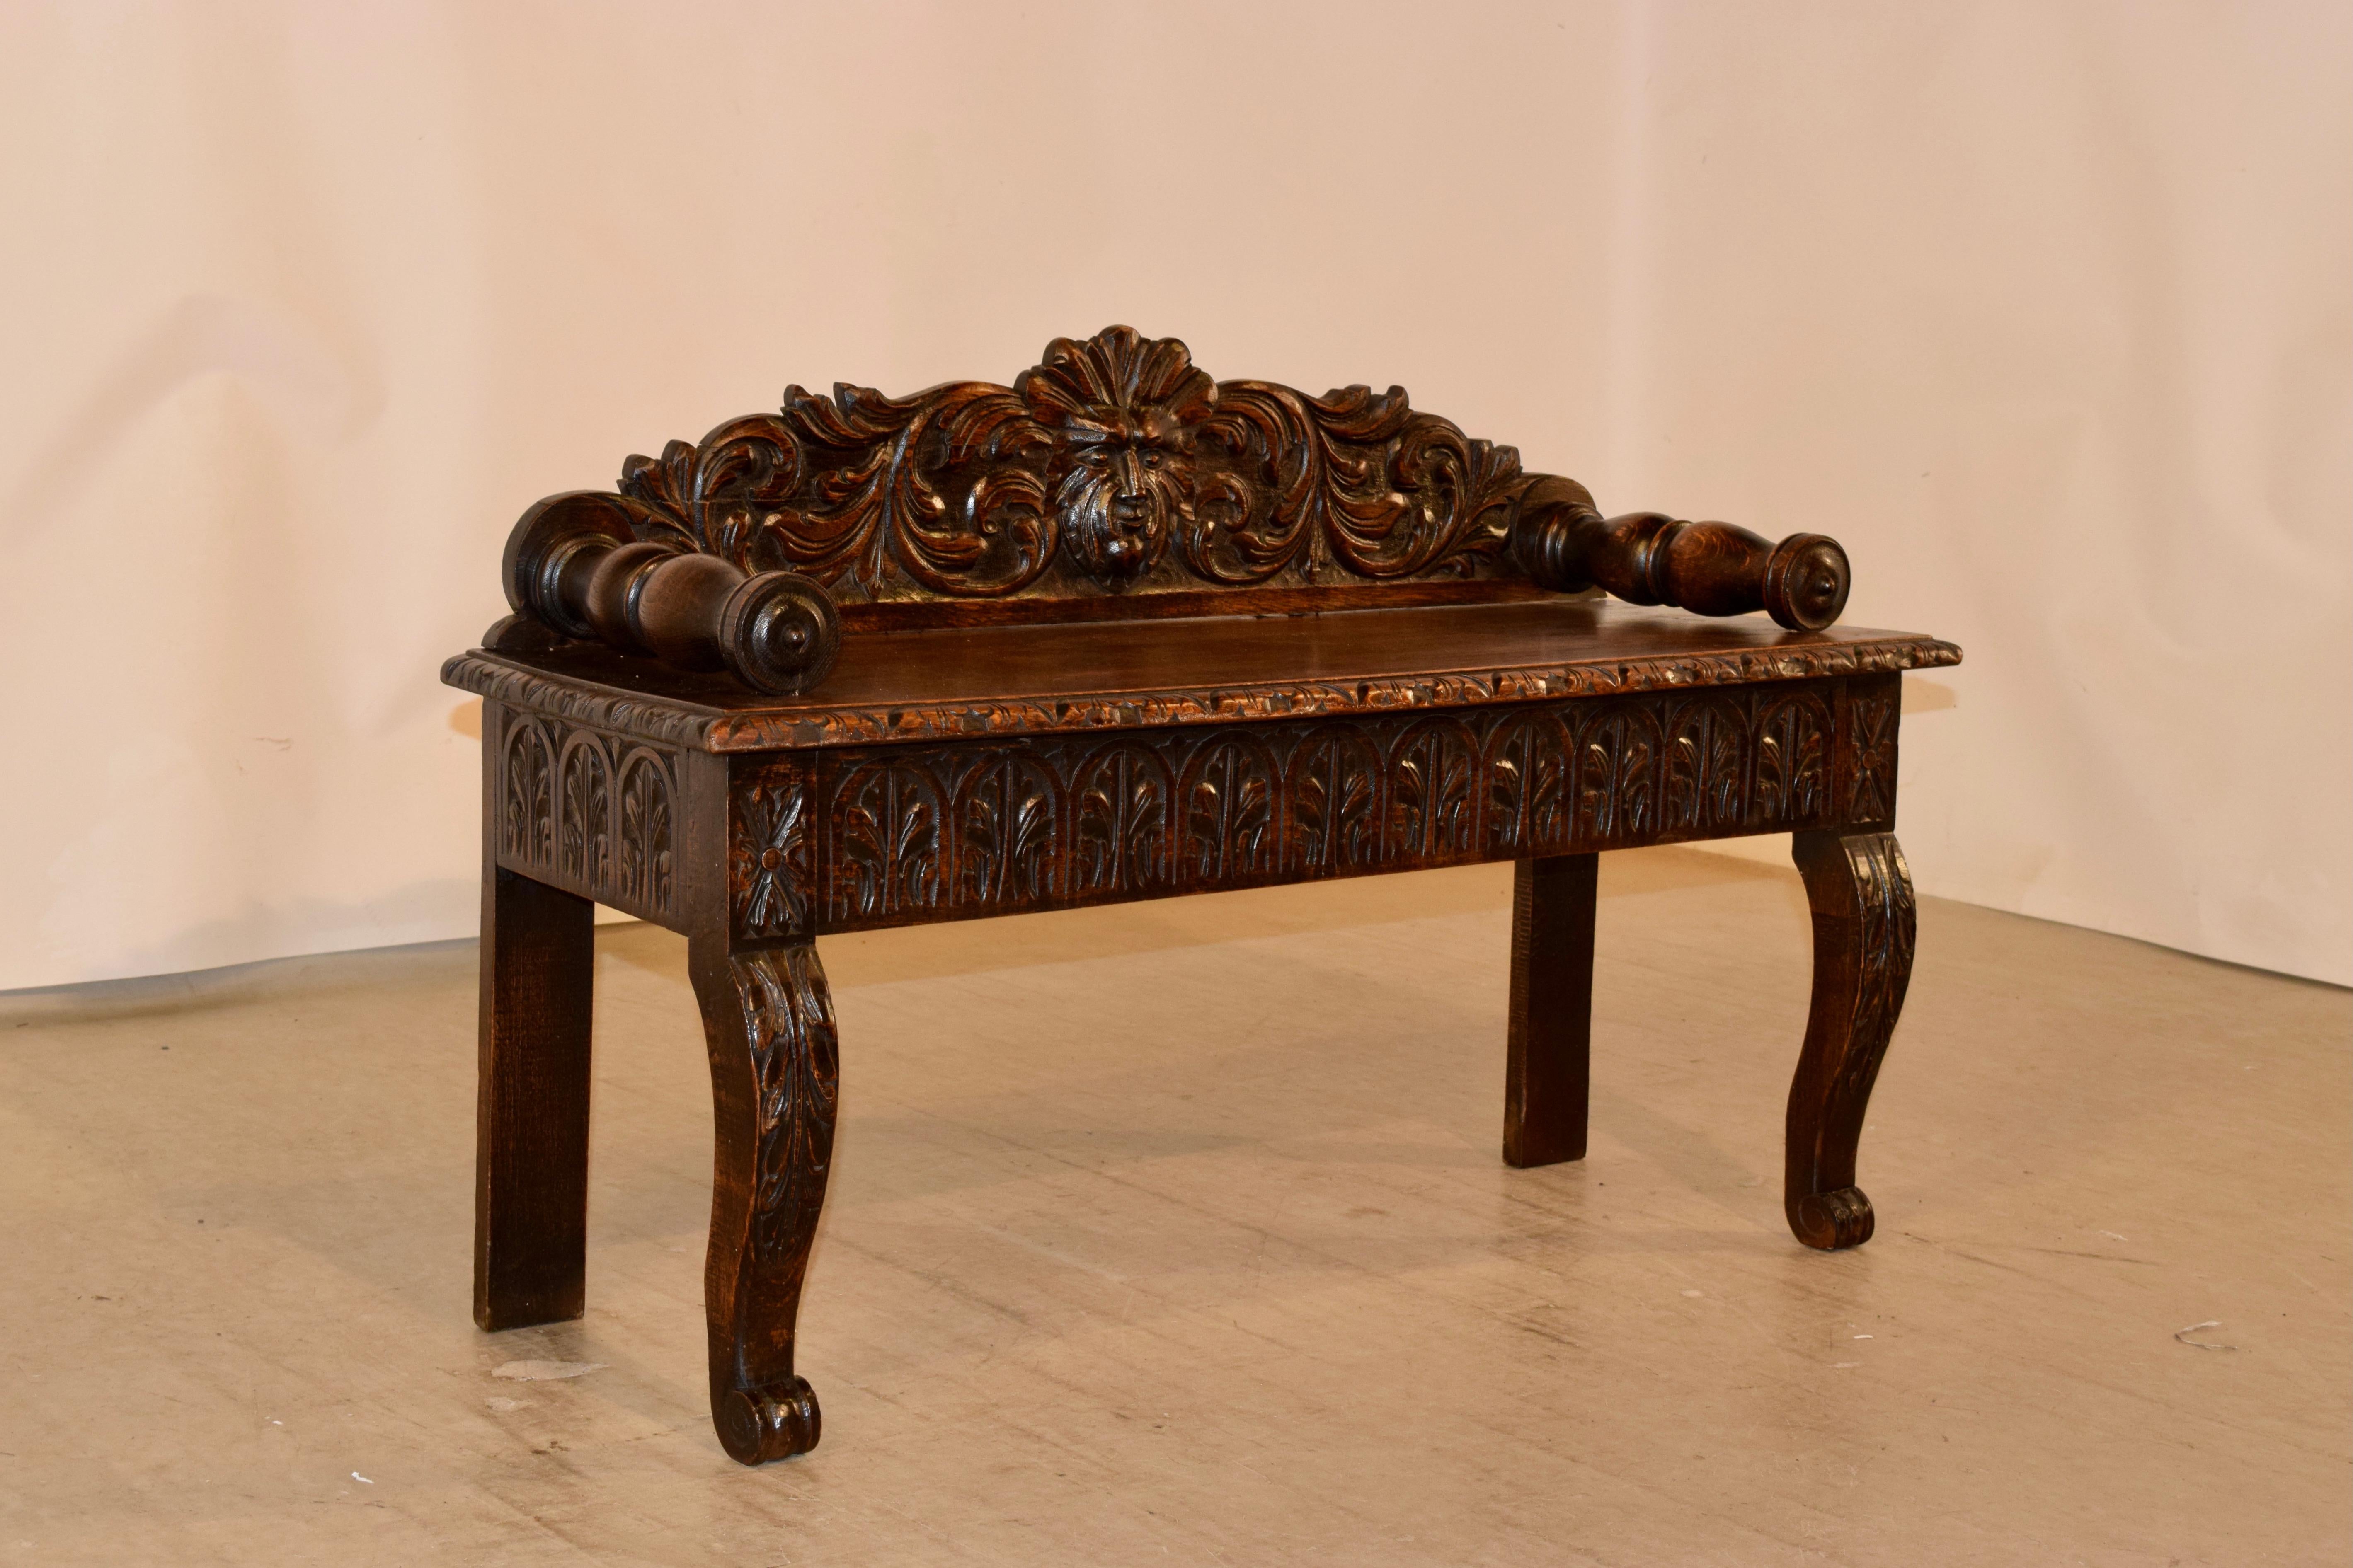 19th century oak window seat from France with an exquisitely hand carved back, depicting a central carved face surrounded by acanthus leaves. The arms are hand turned and are attached to the seat, which has a beveled and carved decorated edge,